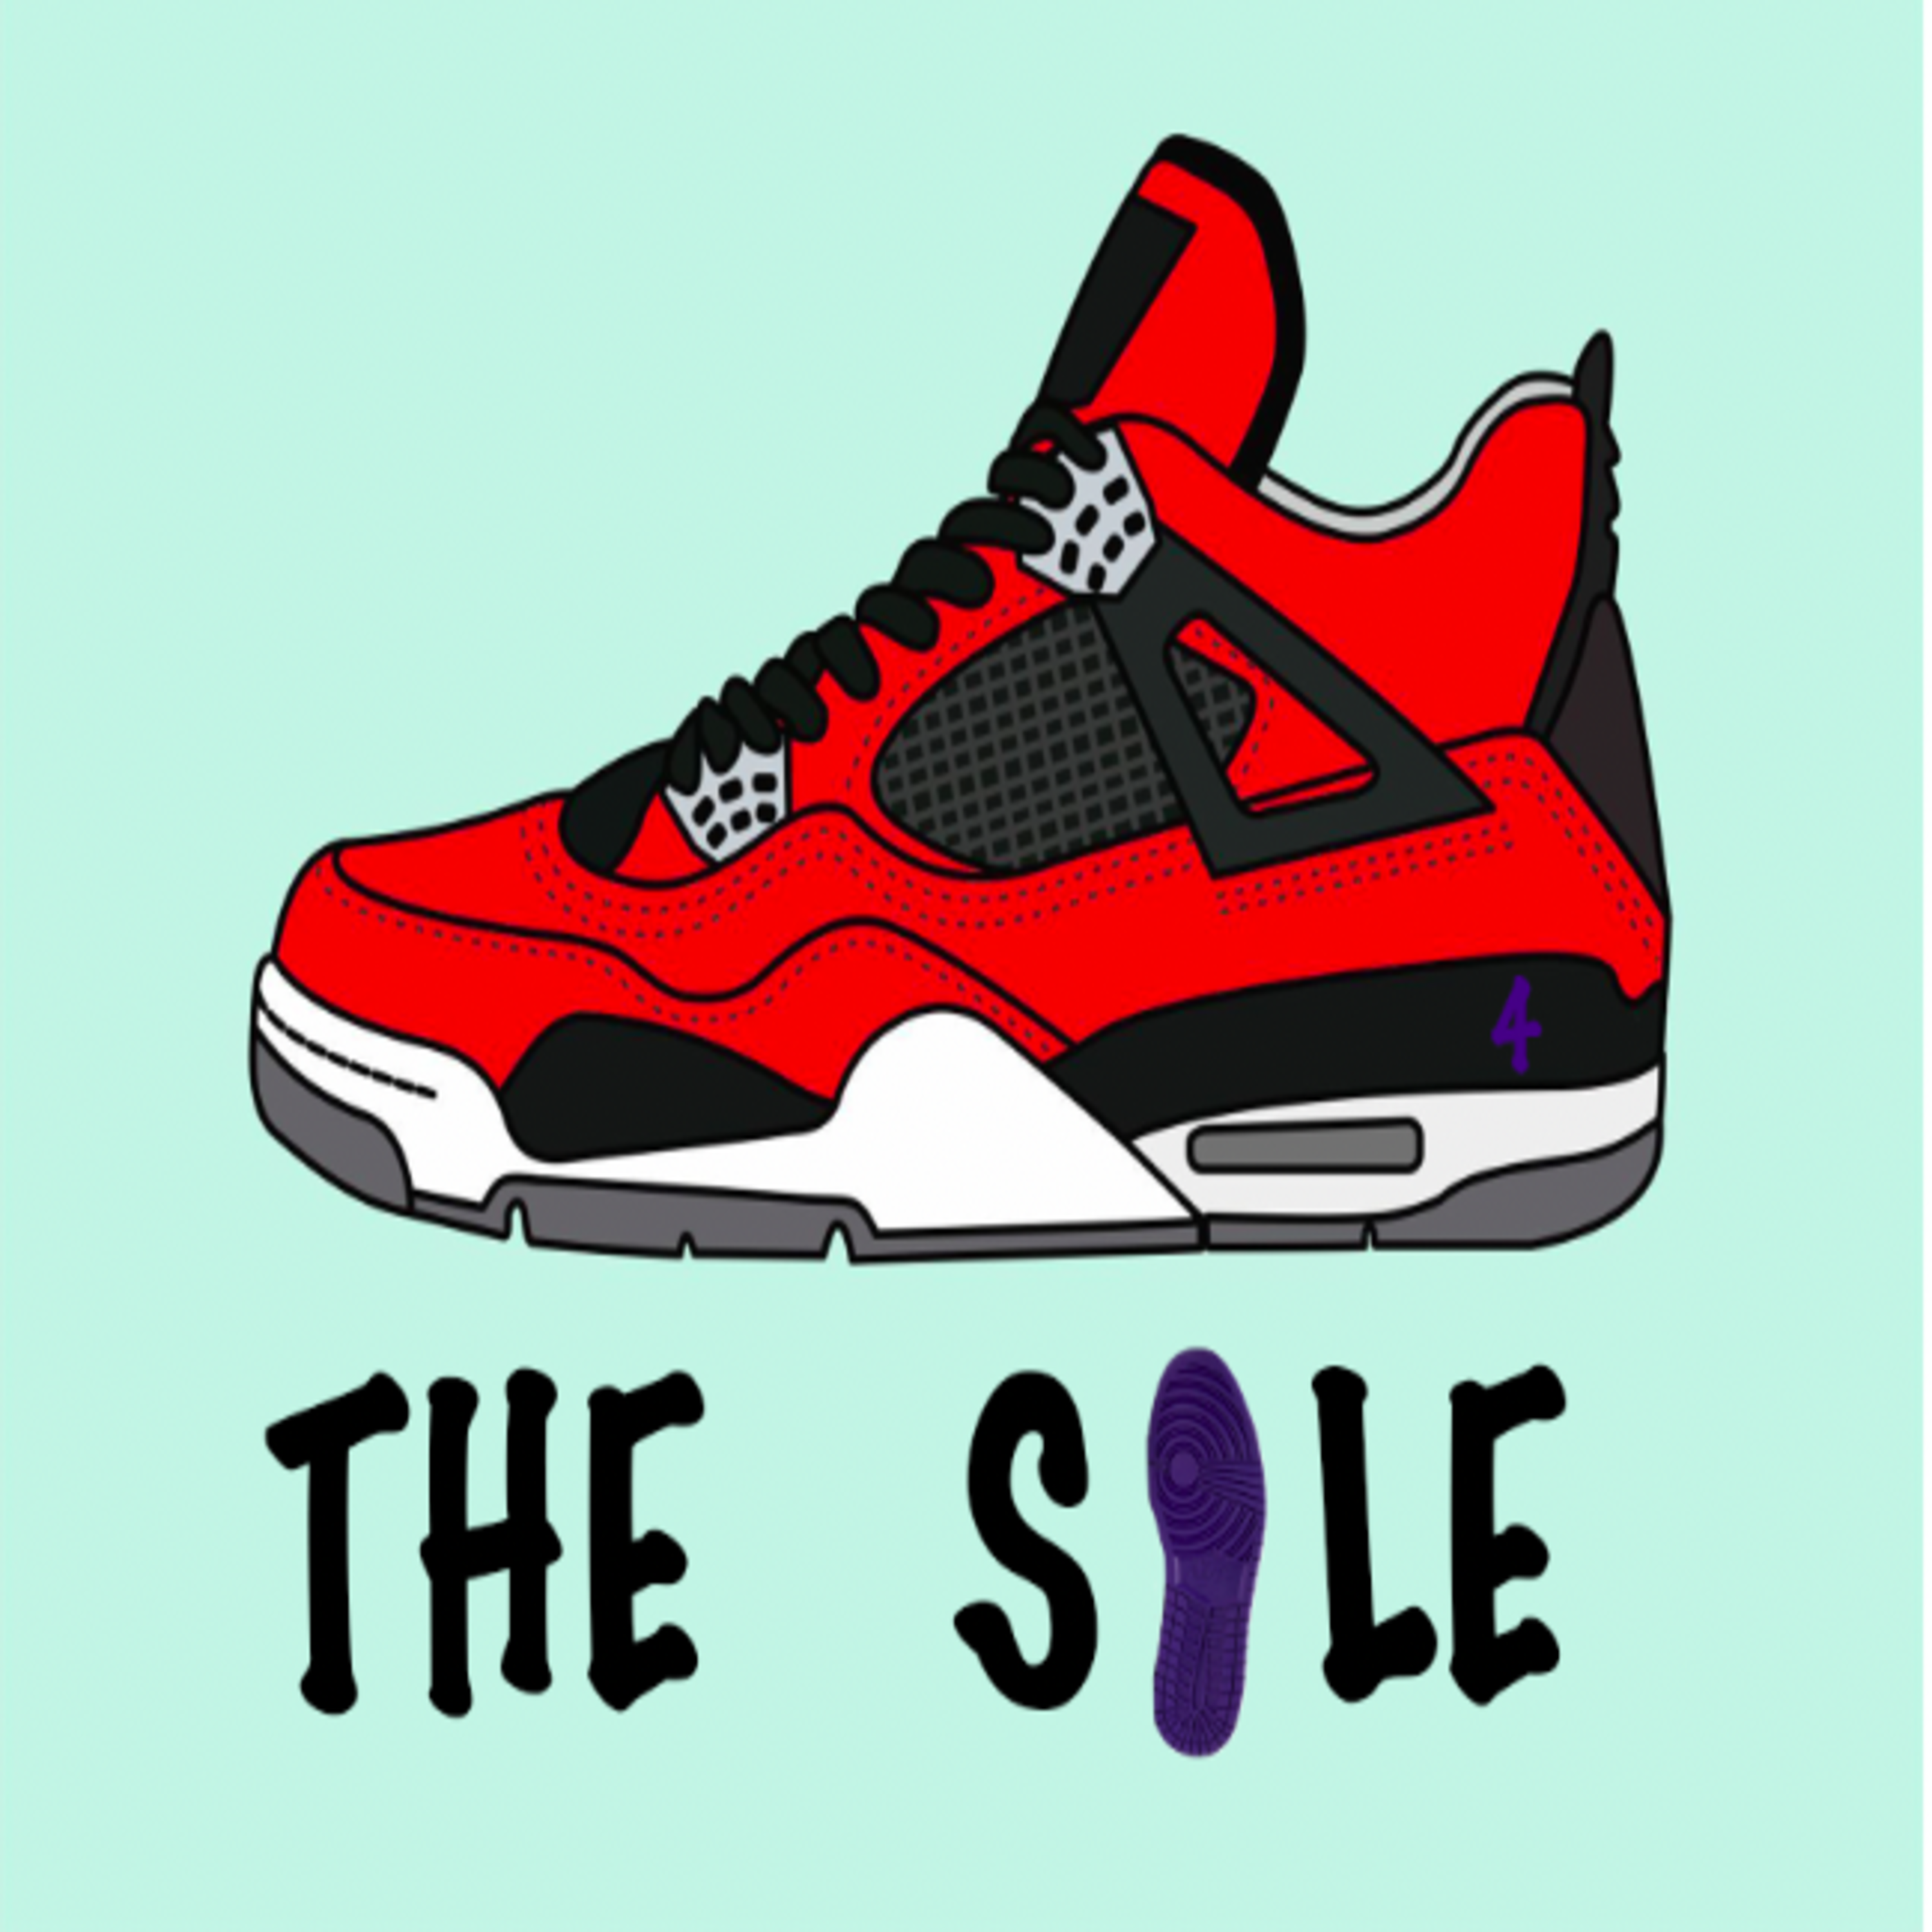 4 The Sole